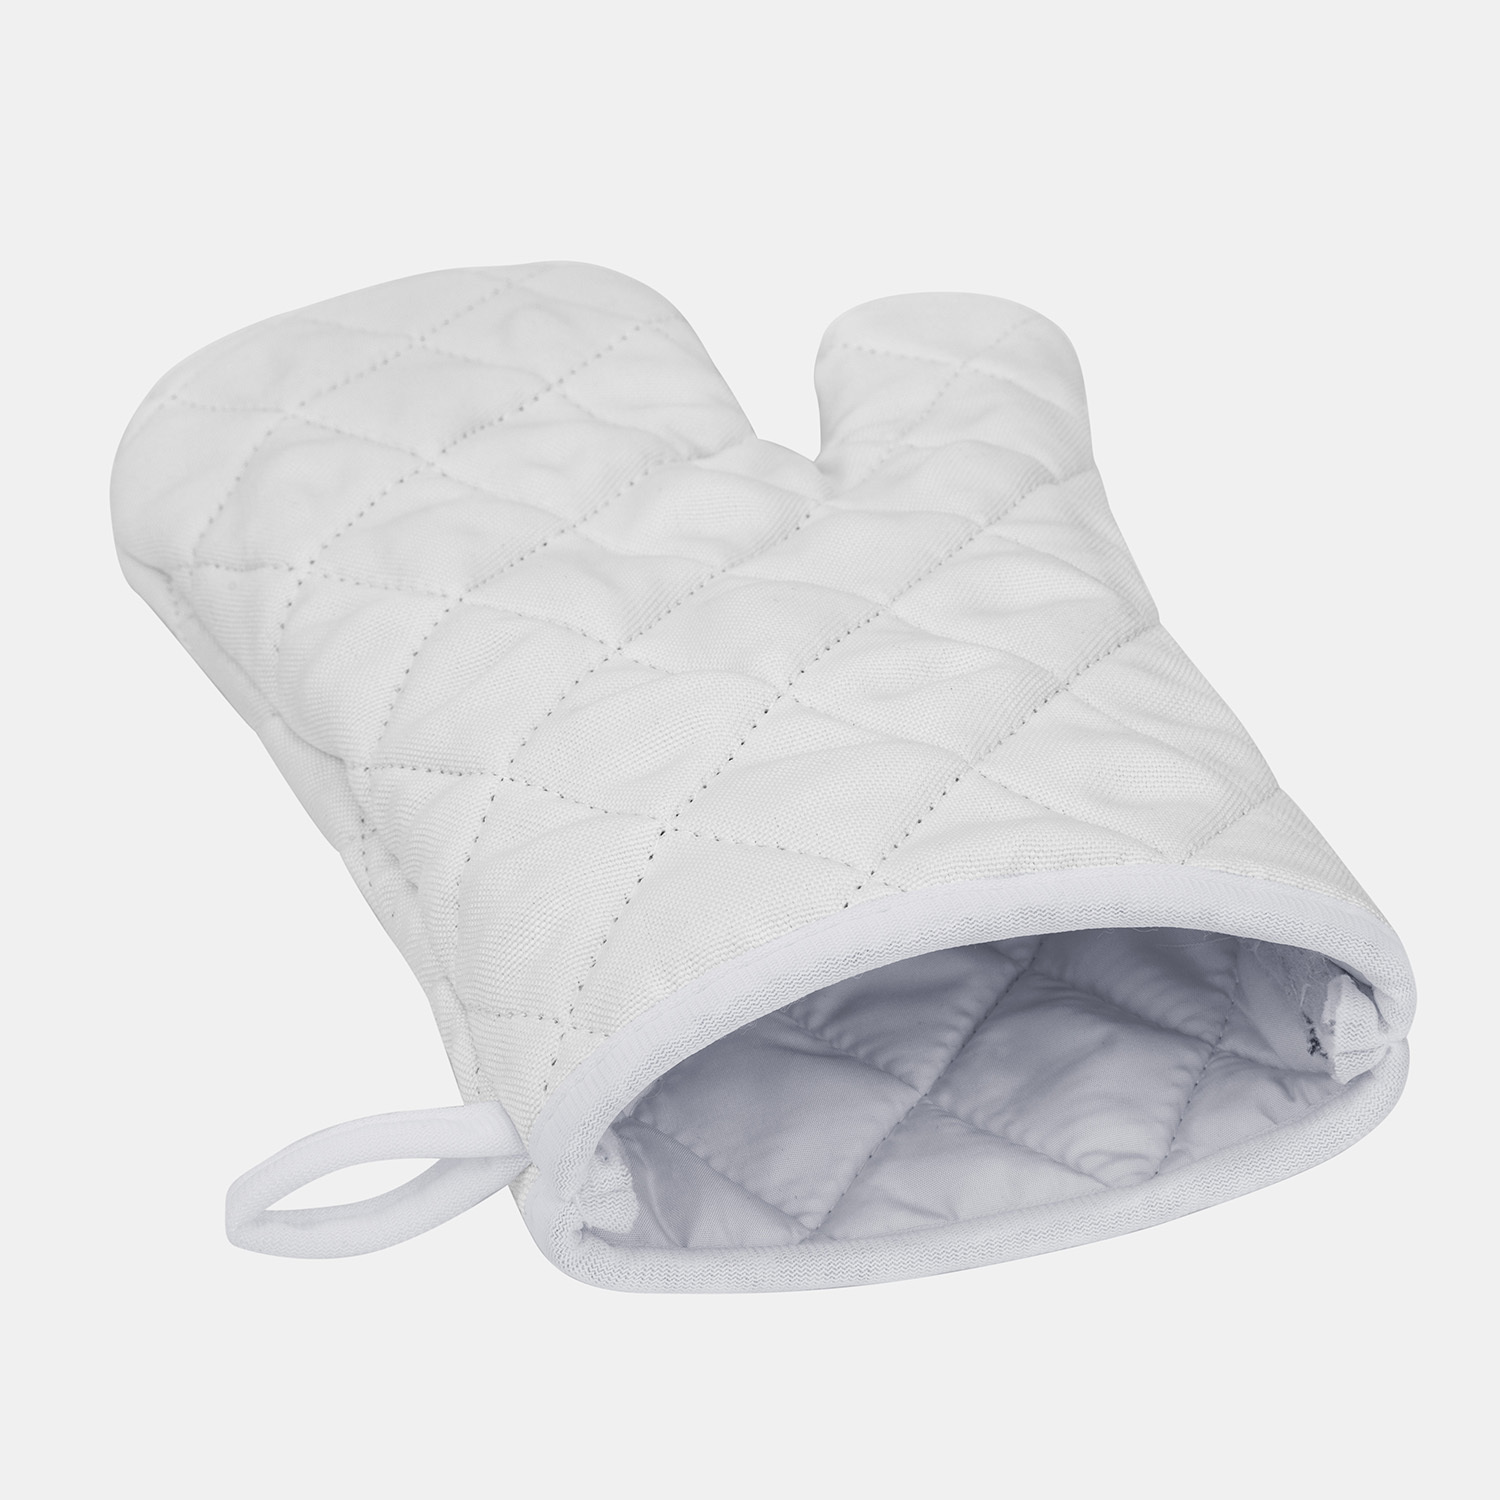 Microwave Oven Gloves & Insulation Pad | HugePOD-8